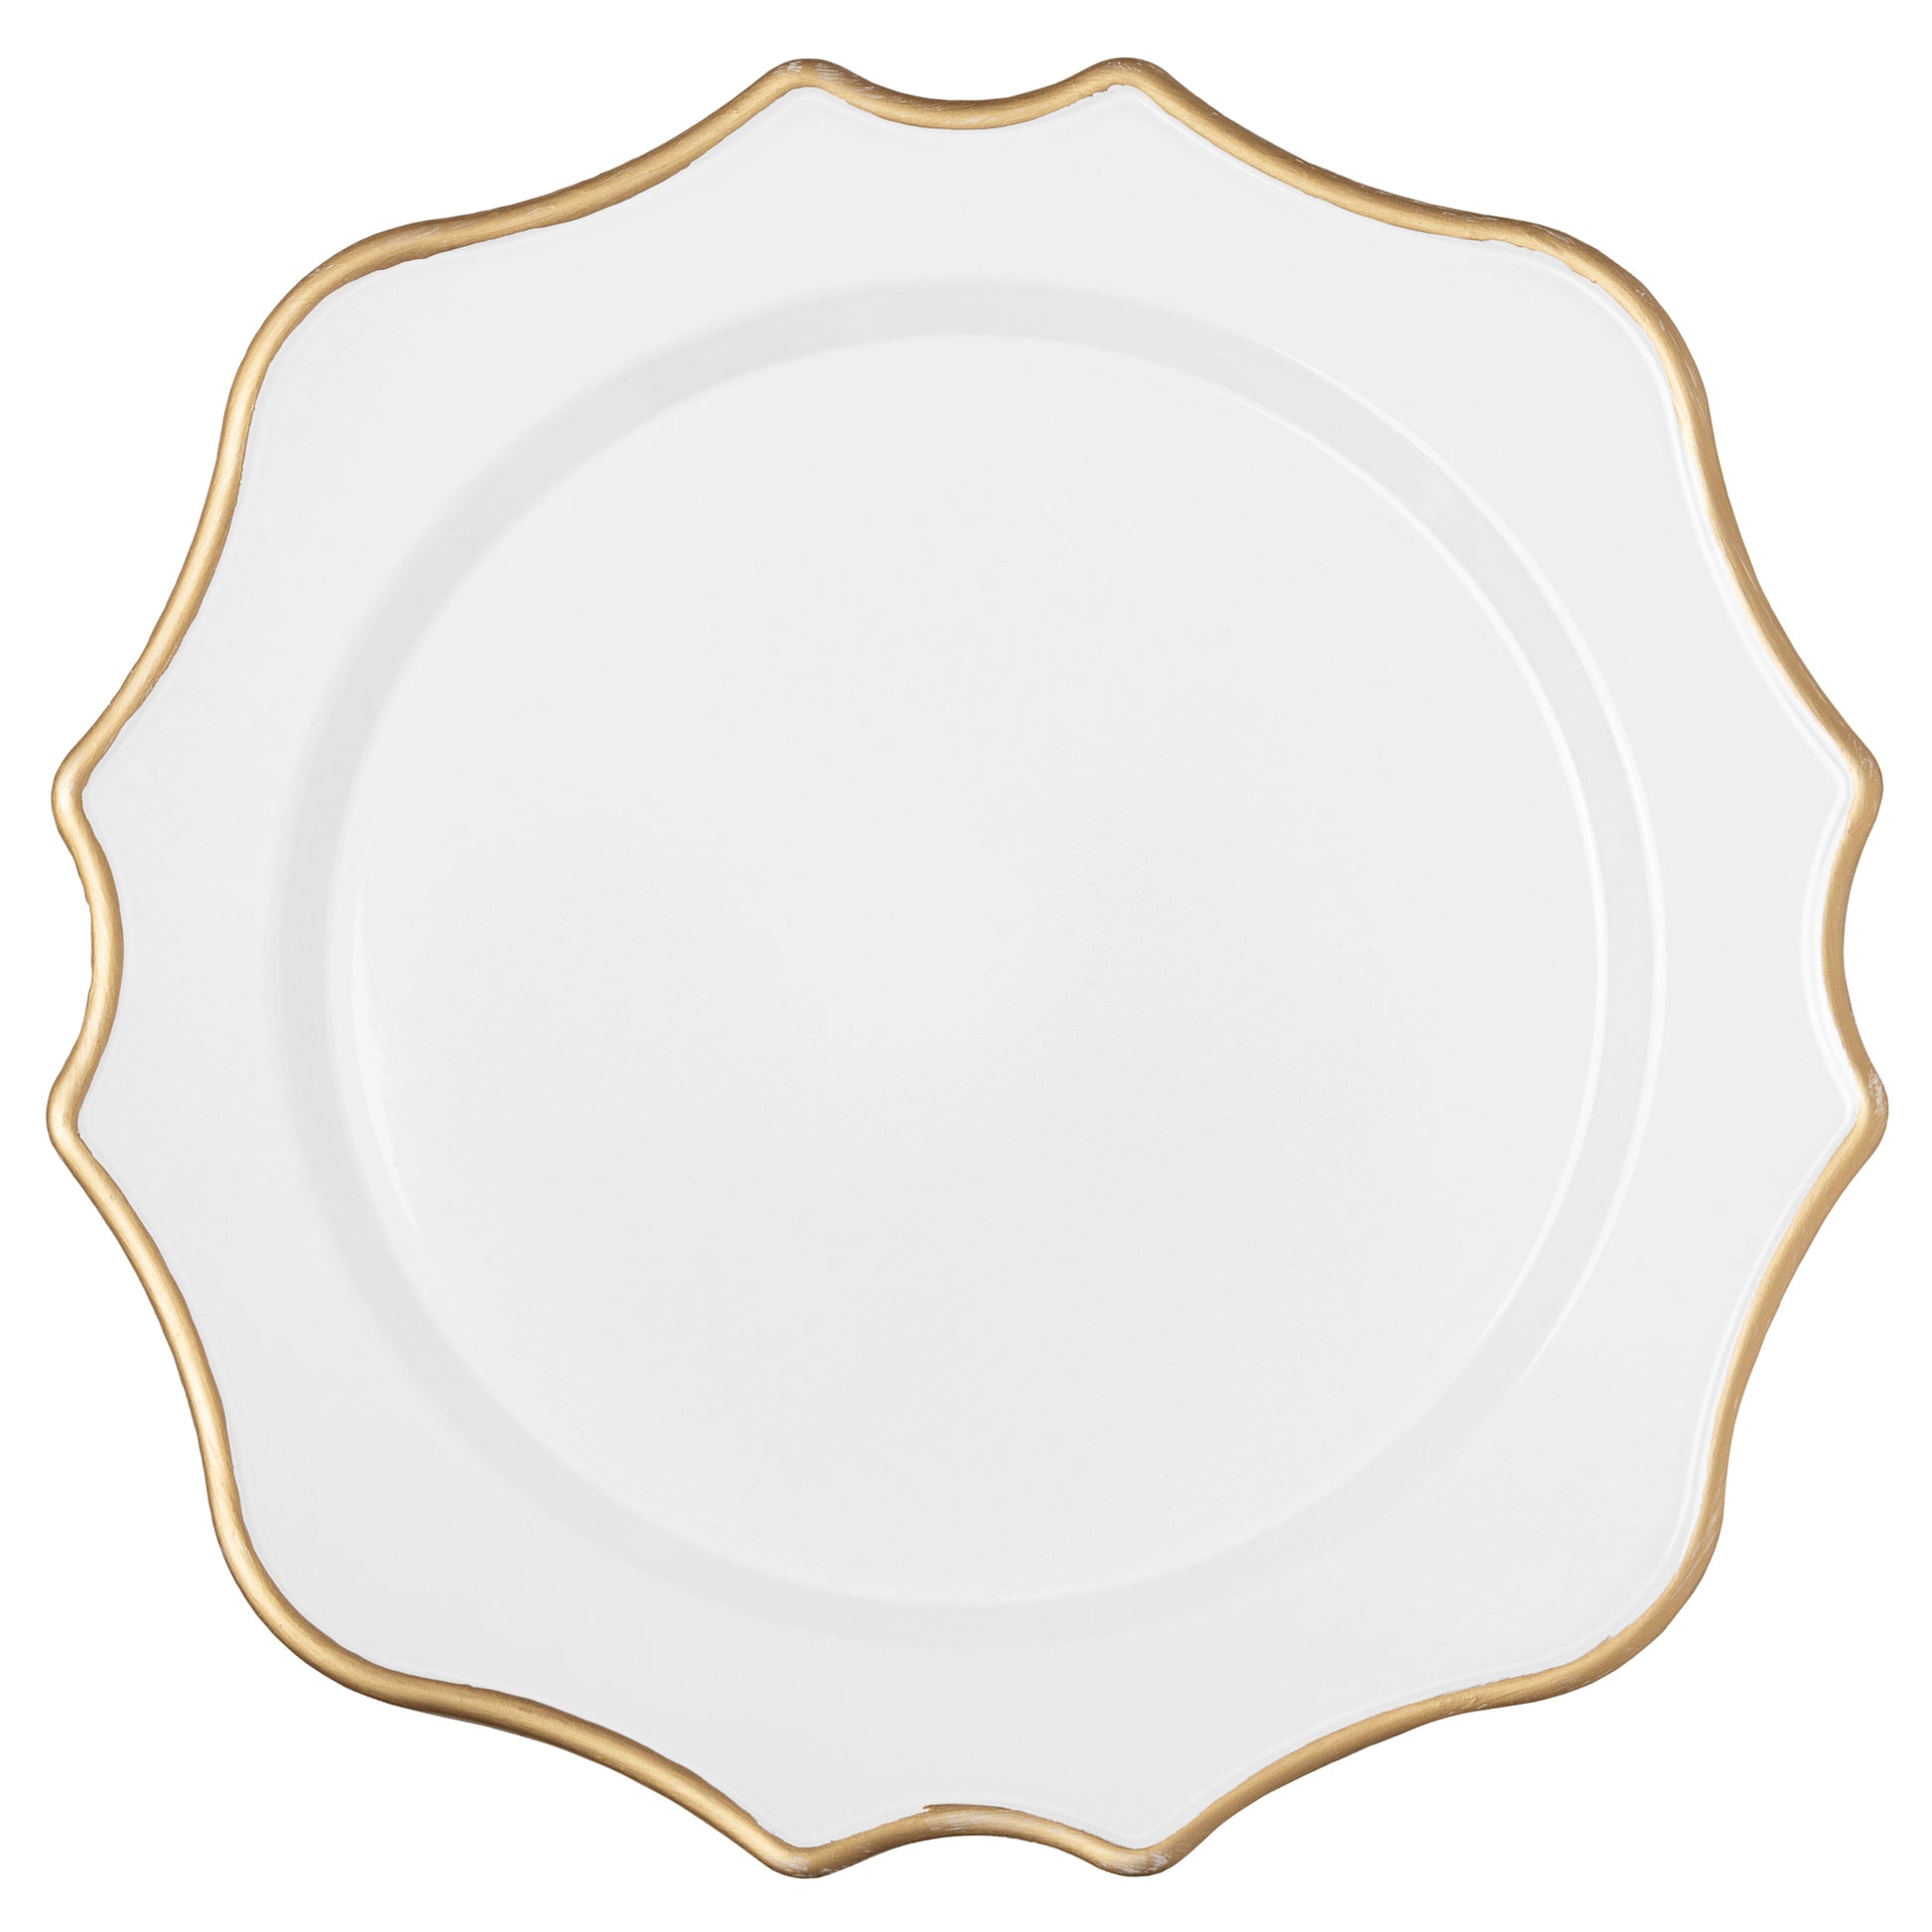 Lotus Scalloped Acrylic 13" Charger Plate - White Gold-Trimmed - CV Linens